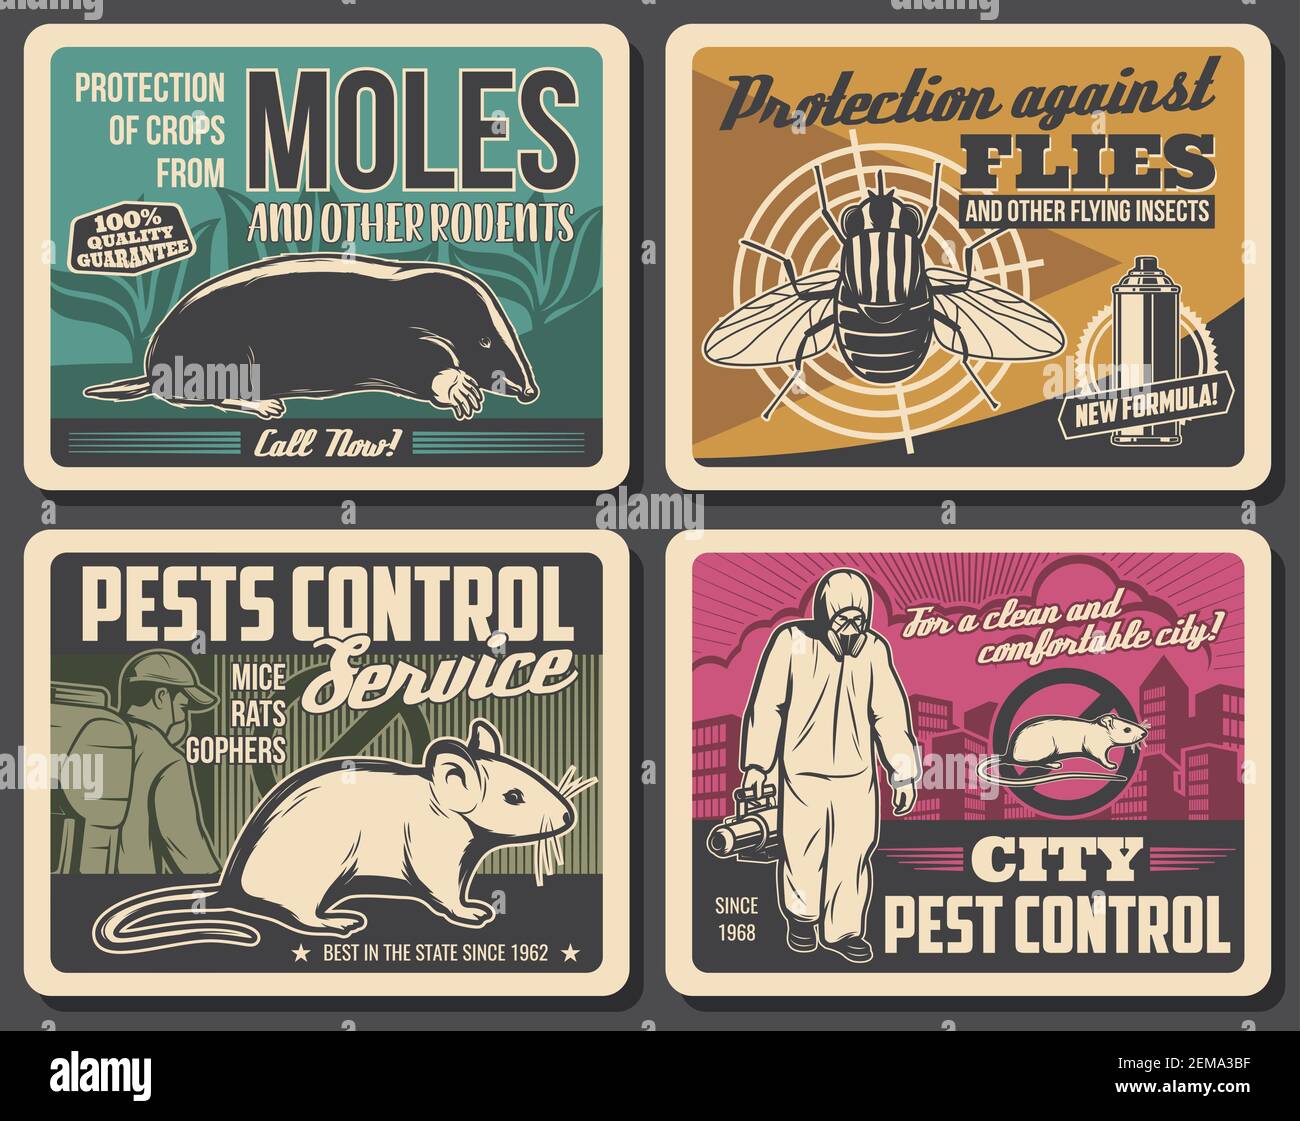 Pest control service, vector retro posters, insects disinsection, rodents extermination and deratization. Agriculture, city and domestic pest control Stock Vector